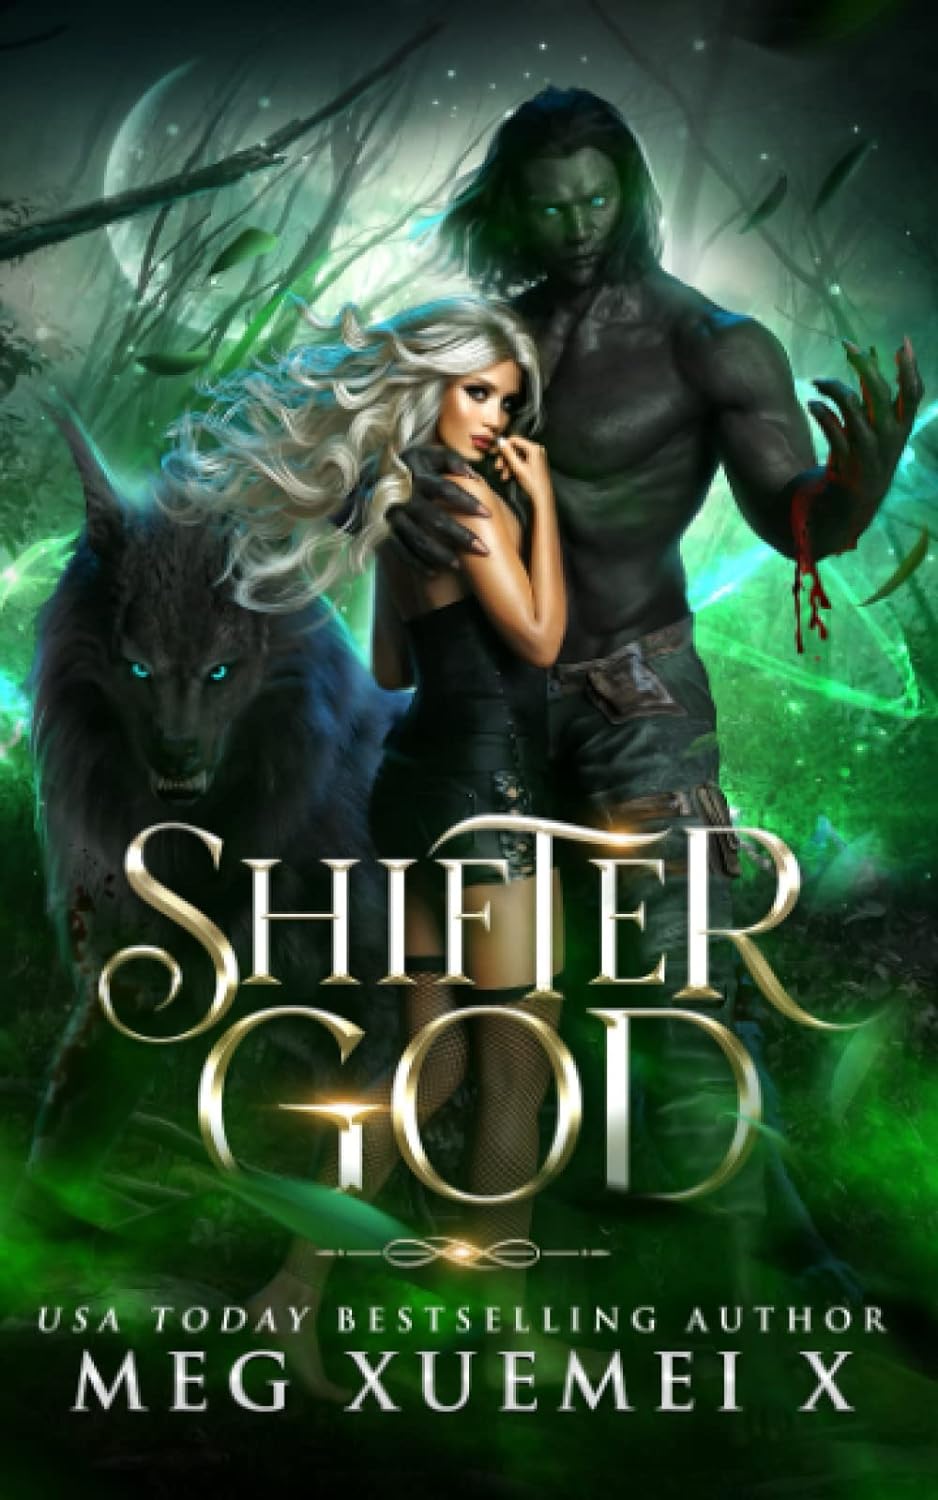 Shifter God (Monsters After Dark Book 1) by…